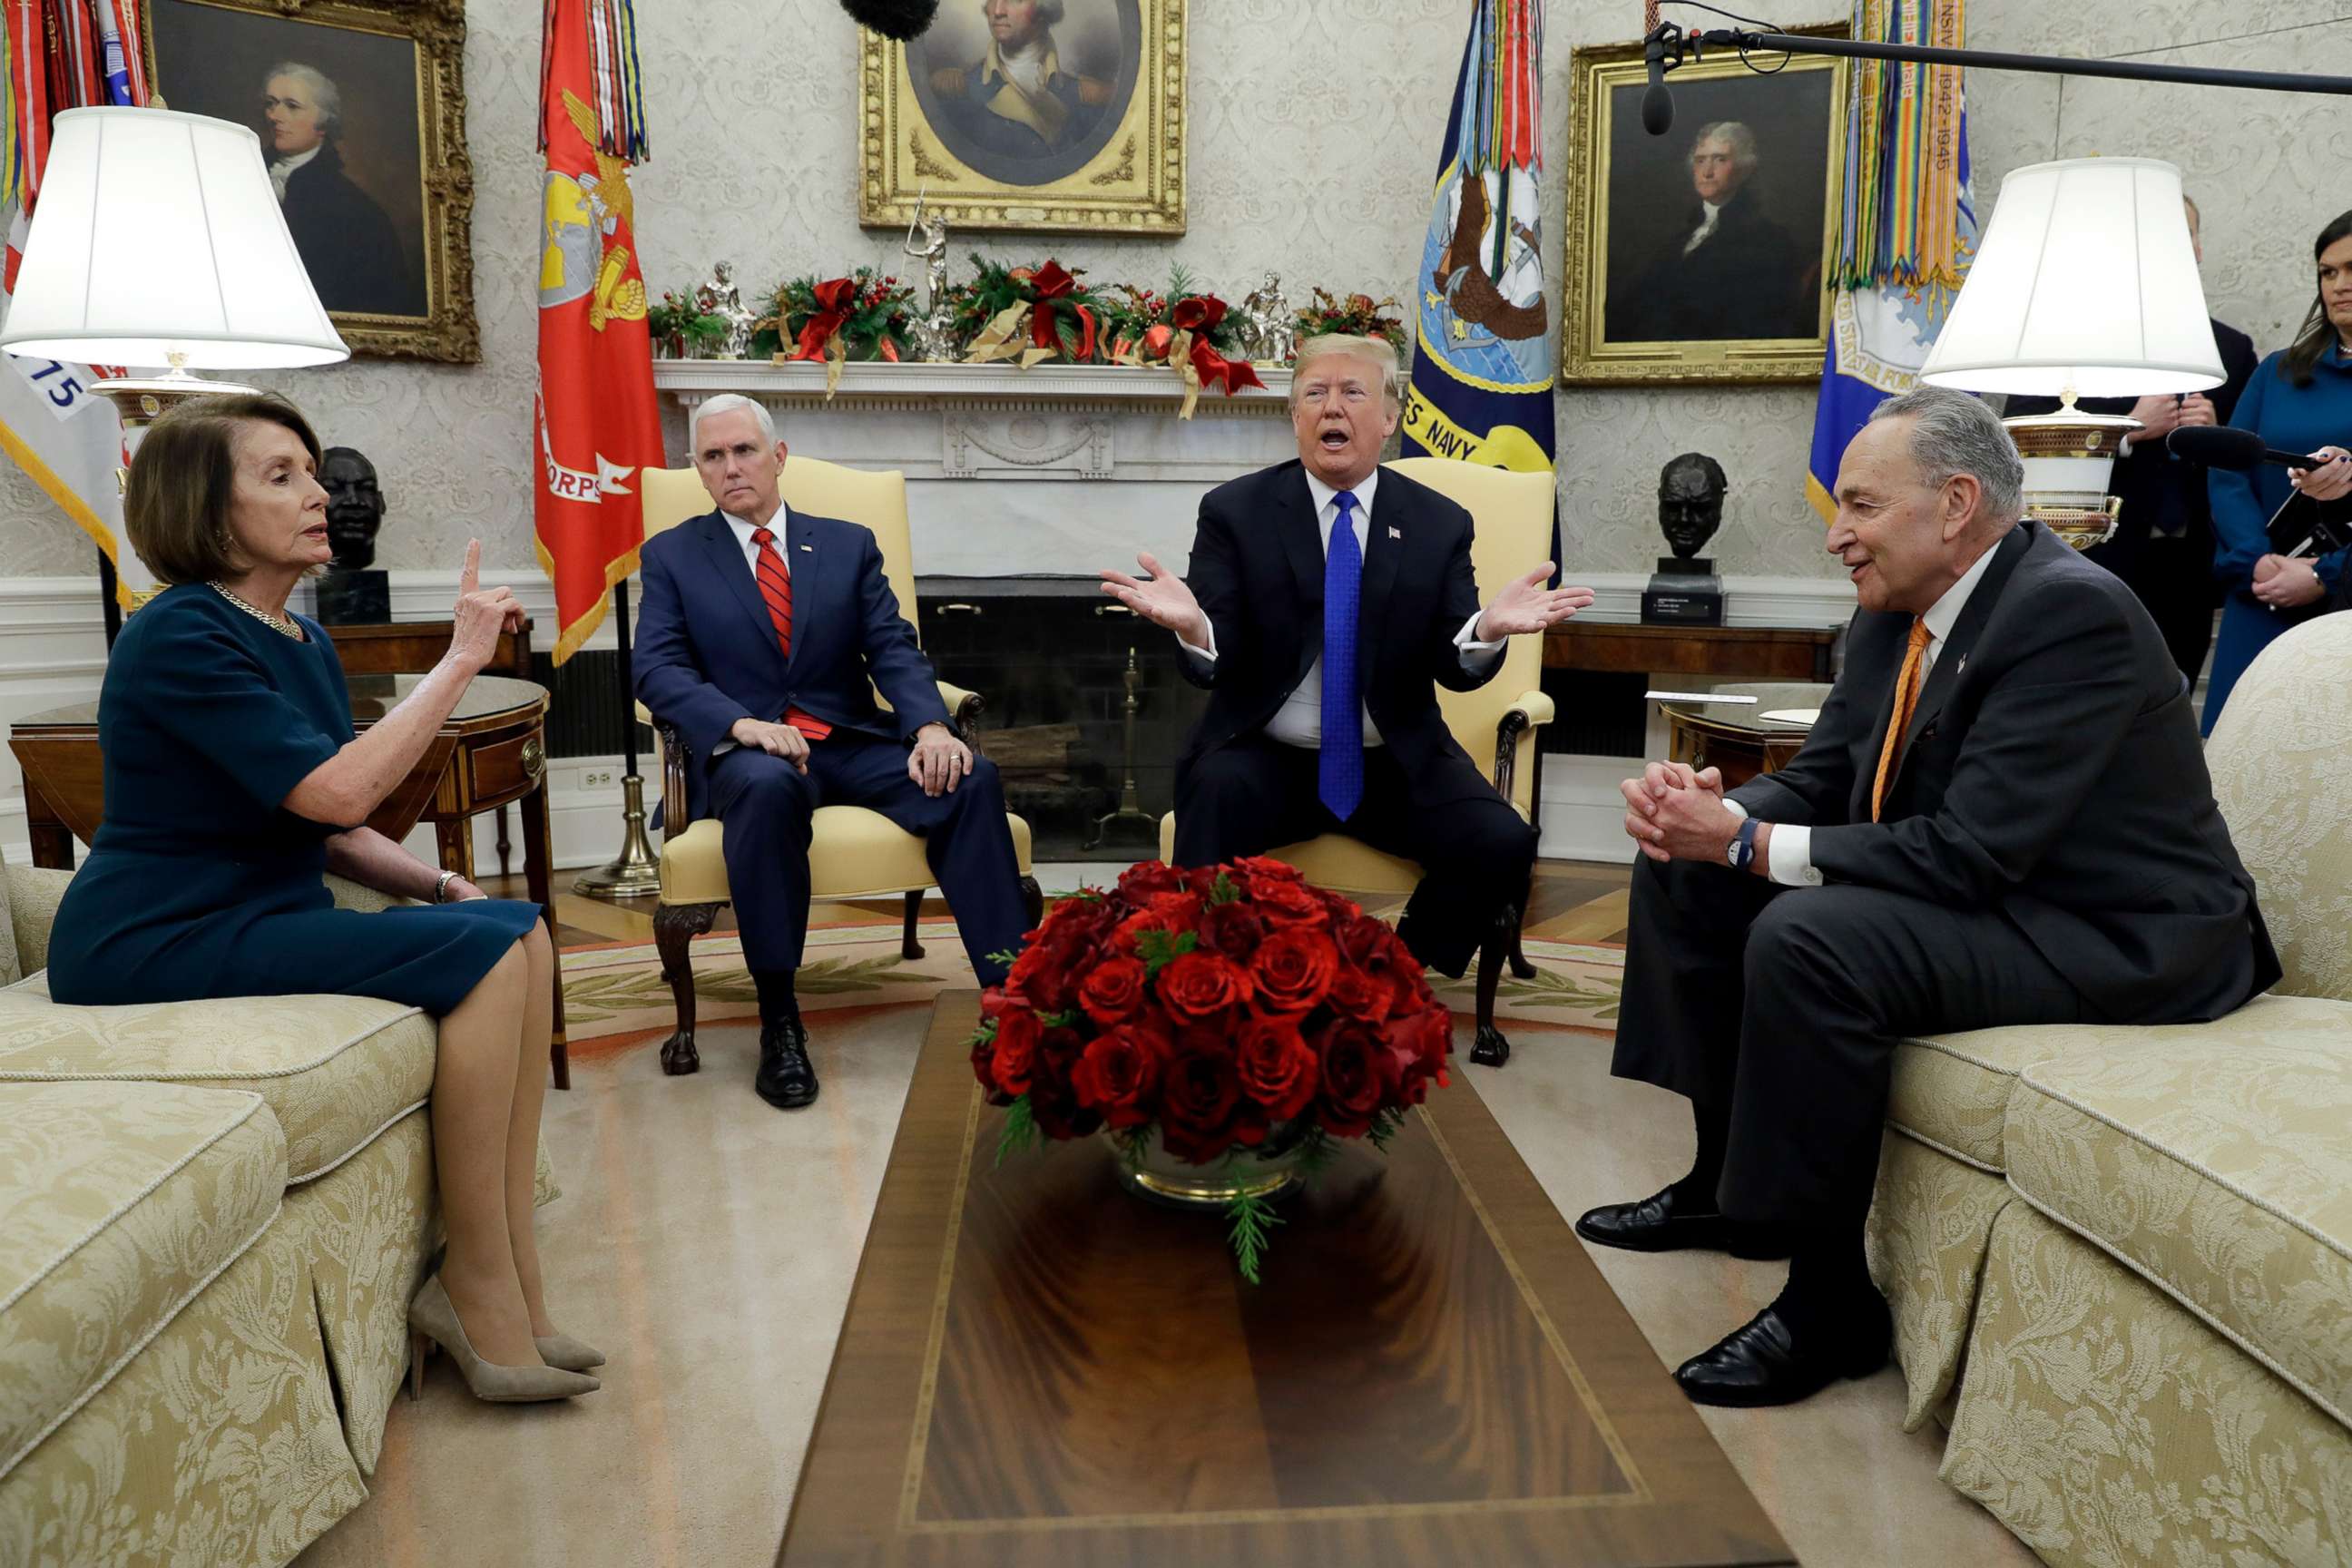 PHOTO: President Donald Trump and Vice President Mike Pence meet with Senate Minority Leader Chuck Schumer and House Minority Leader Nancy Pelosi in the Oval Office of the White House, Dec. 11, 2018, in Washington.